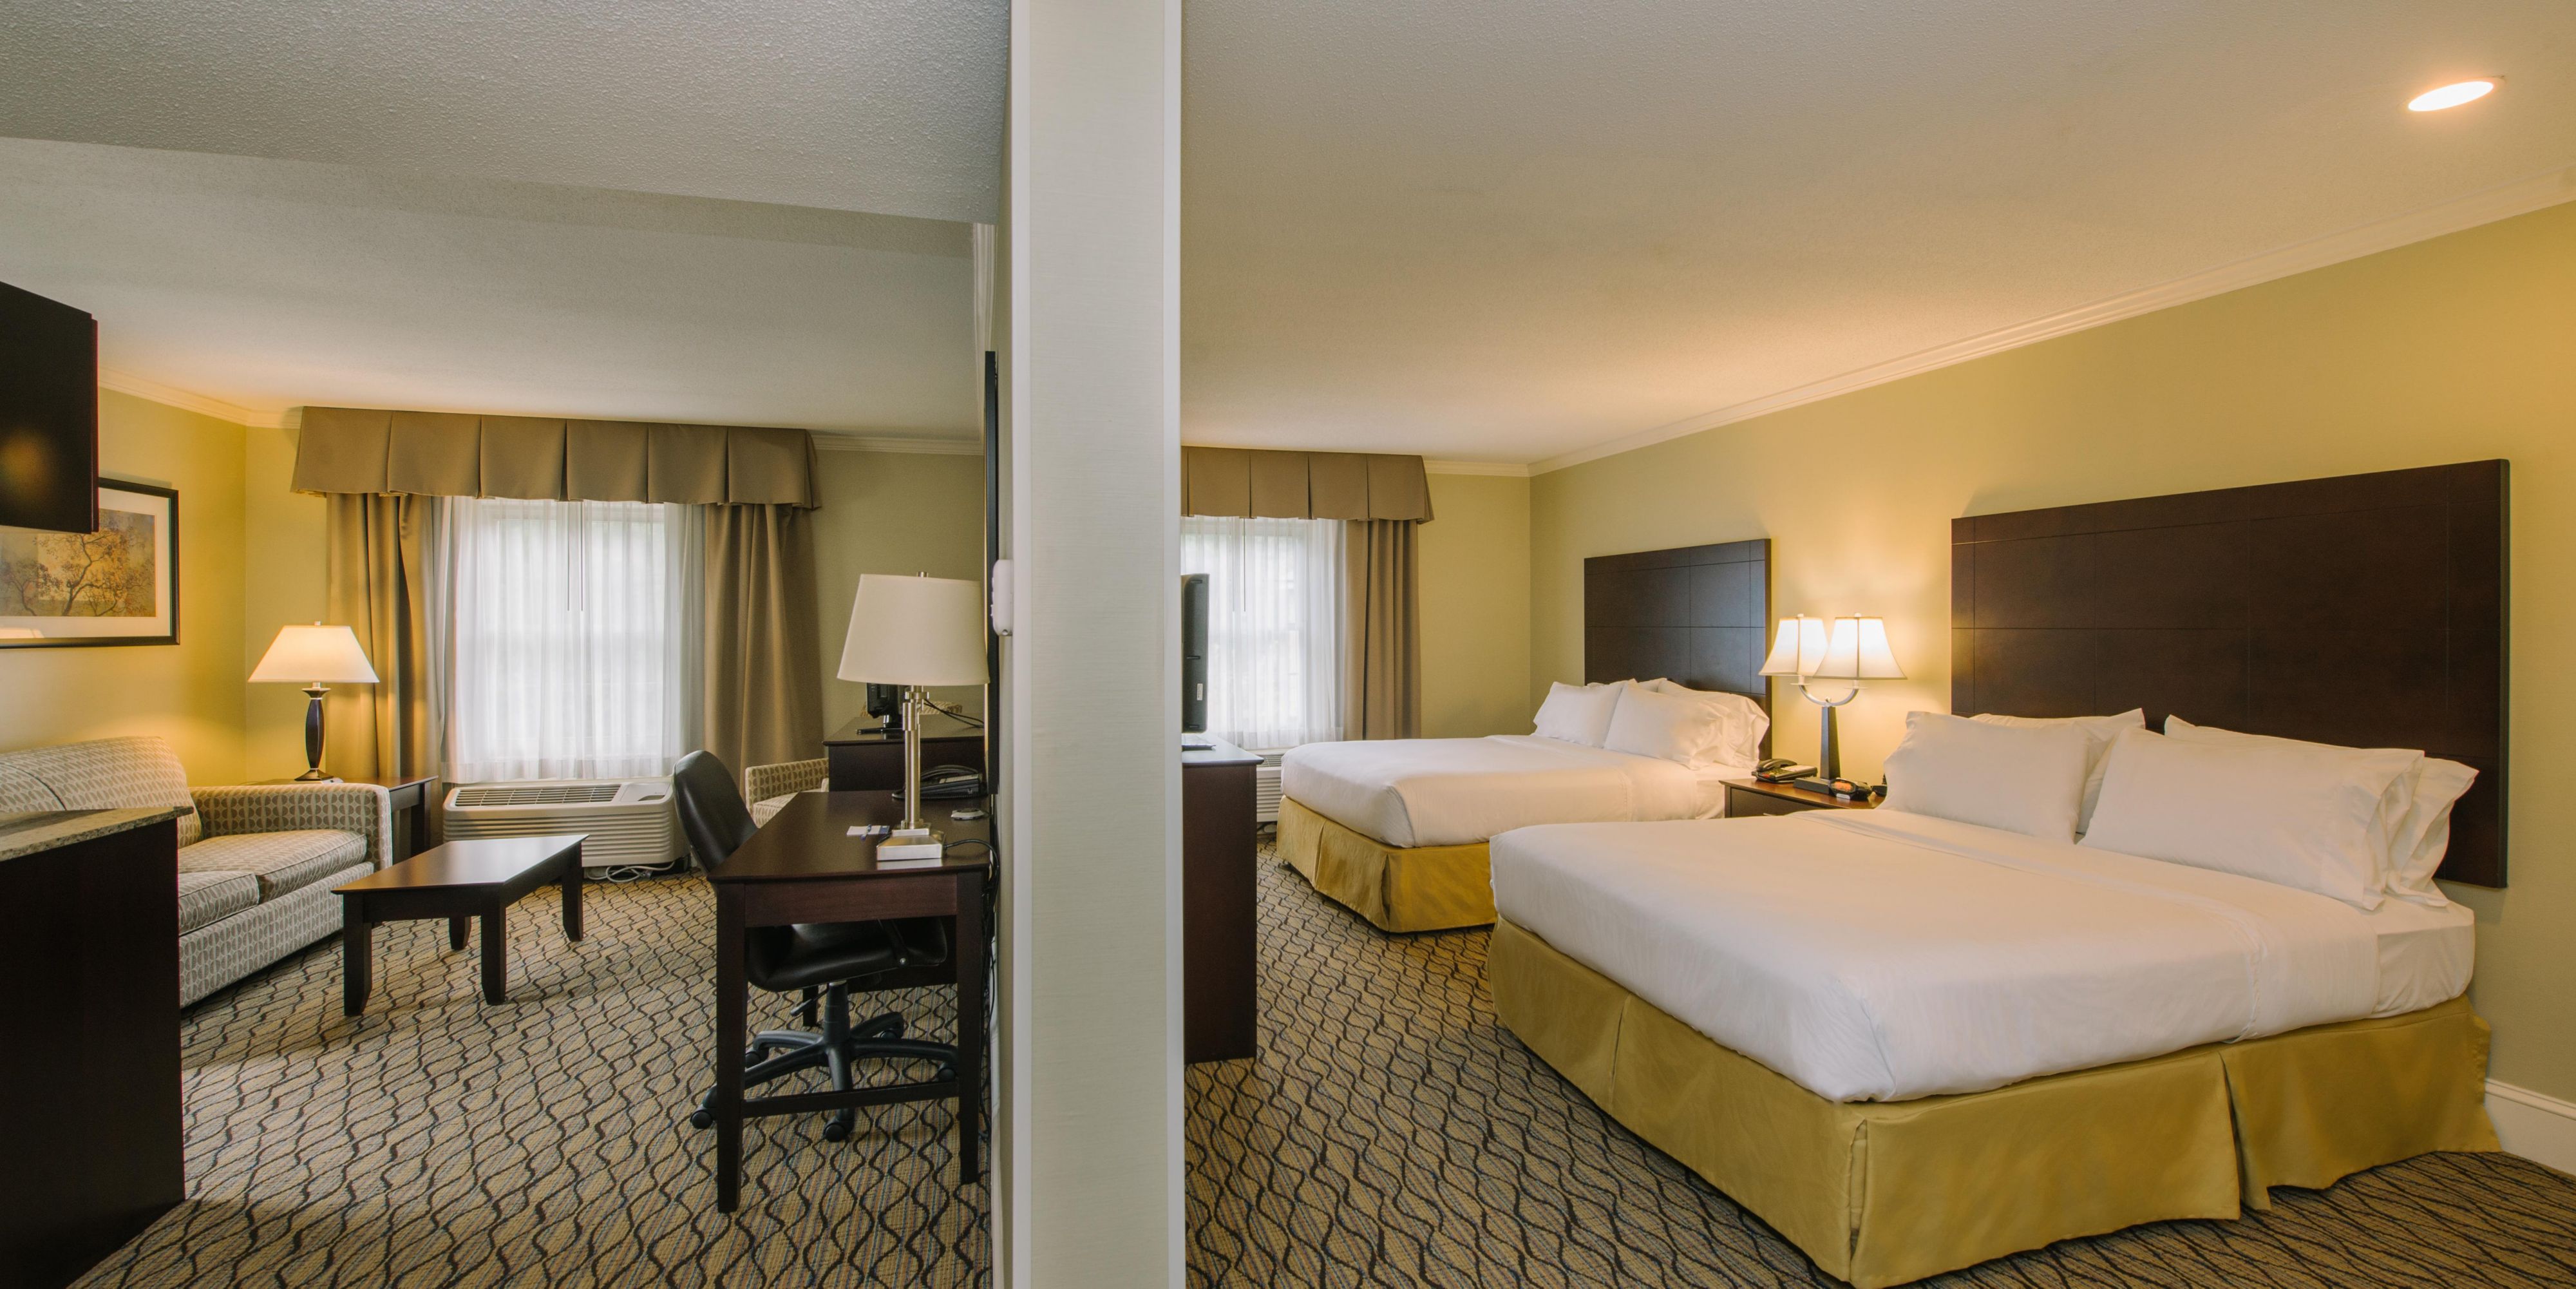 Planning a girl’s weekend or need extra room when traveling with your kids? Enjoy our double queen suite with a separate living room.